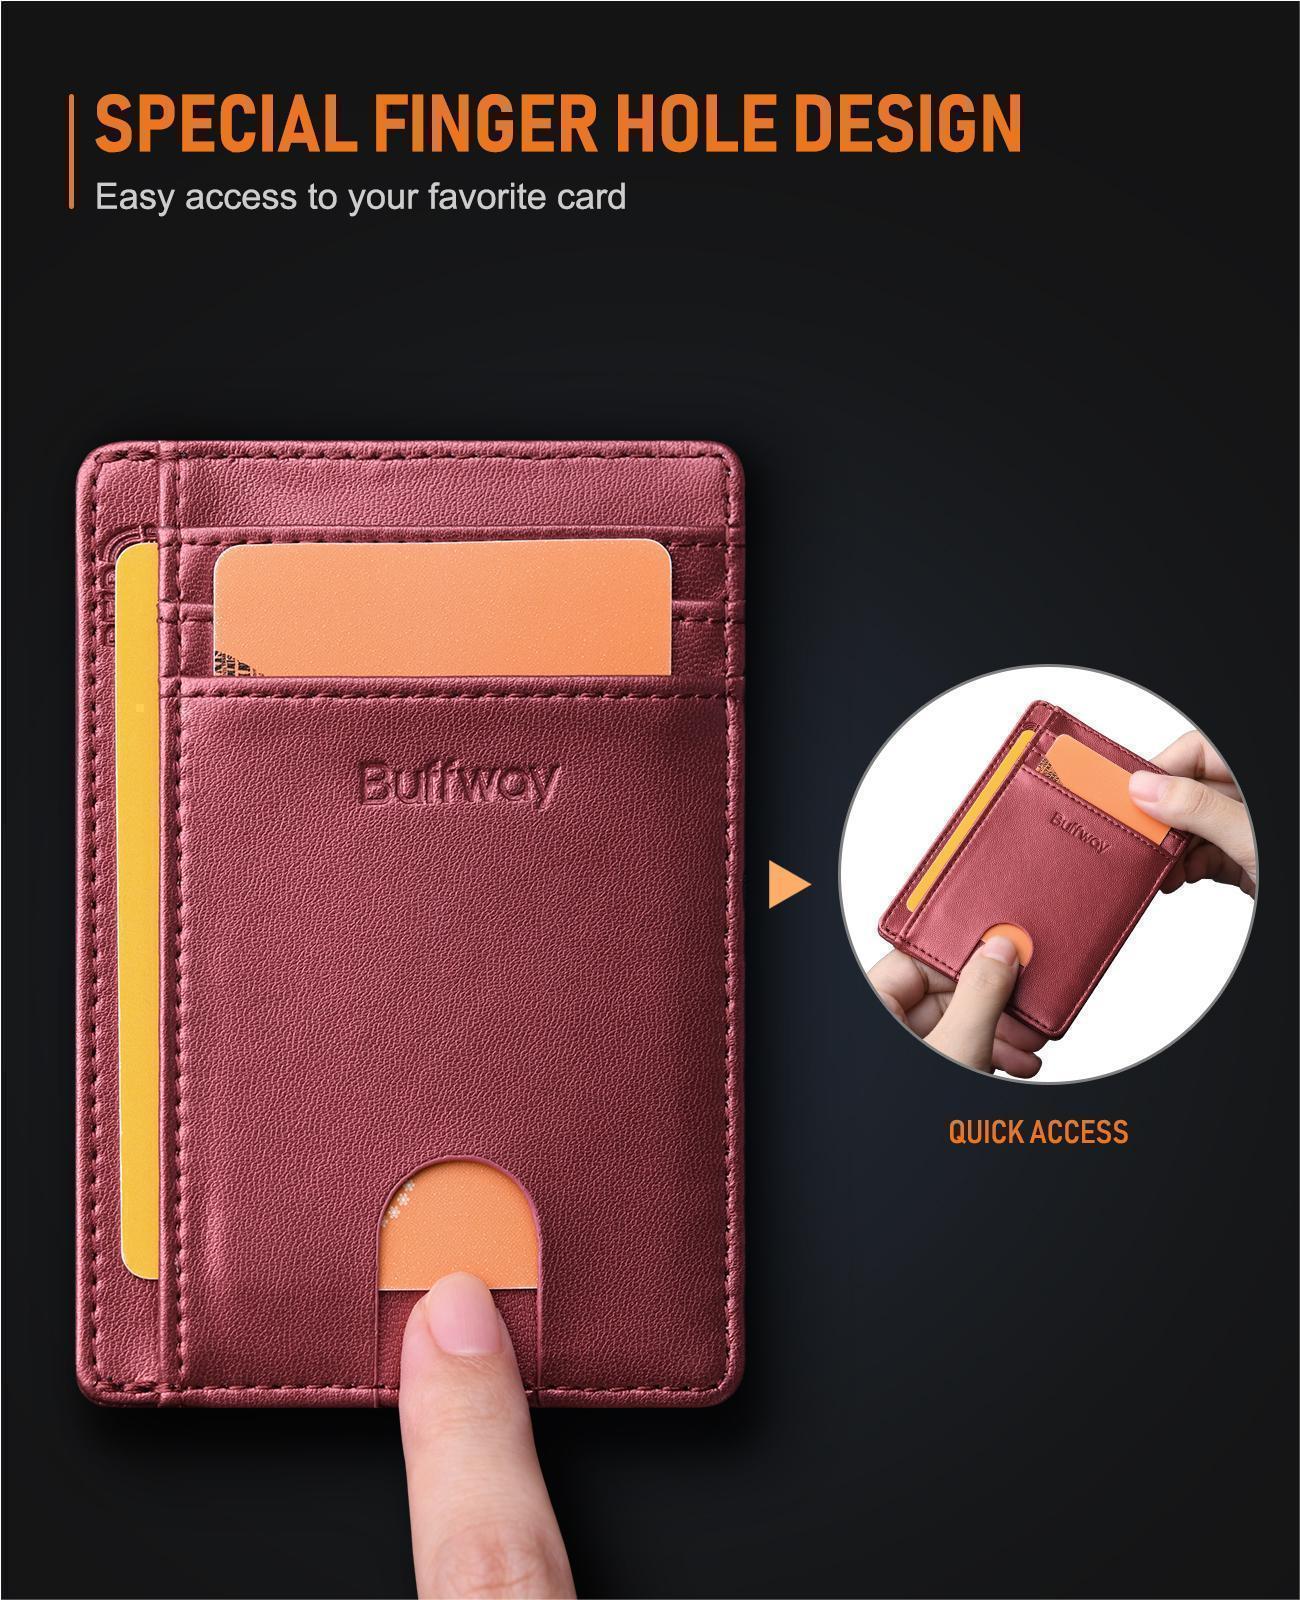 Buffway Slim Minimalist Front Pocket RFID Blocking Leather Wallets for Men and Women - Sand Rose Gold